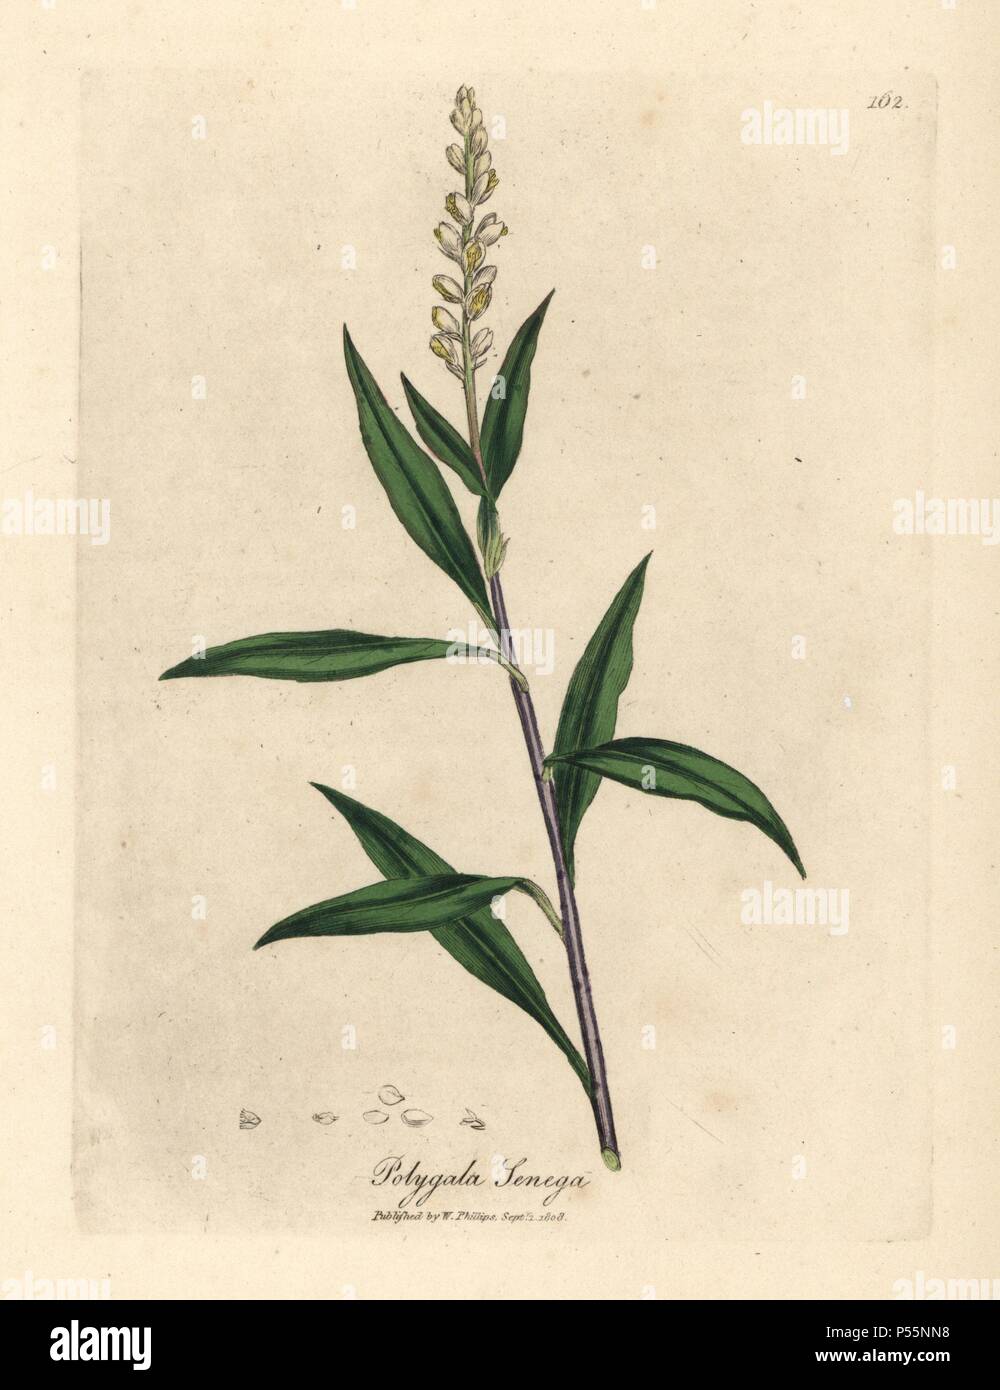 Senega, Polygala senega. Handcoloured copperplate engraving from a botanical illustration by James Sowerby from William Woodville and Sir William Jackson Hooker's 'Medical Botany,' John Bohn, London, 1832. The tireless Sowerby (1757-1822) drew over 2, 500 plants for Smith's mammoth 'English Botany' (1790-1814) and 440 mushrooms for 'Coloured Figures of English Fungi ' (1797) among many other works. Stock Photo